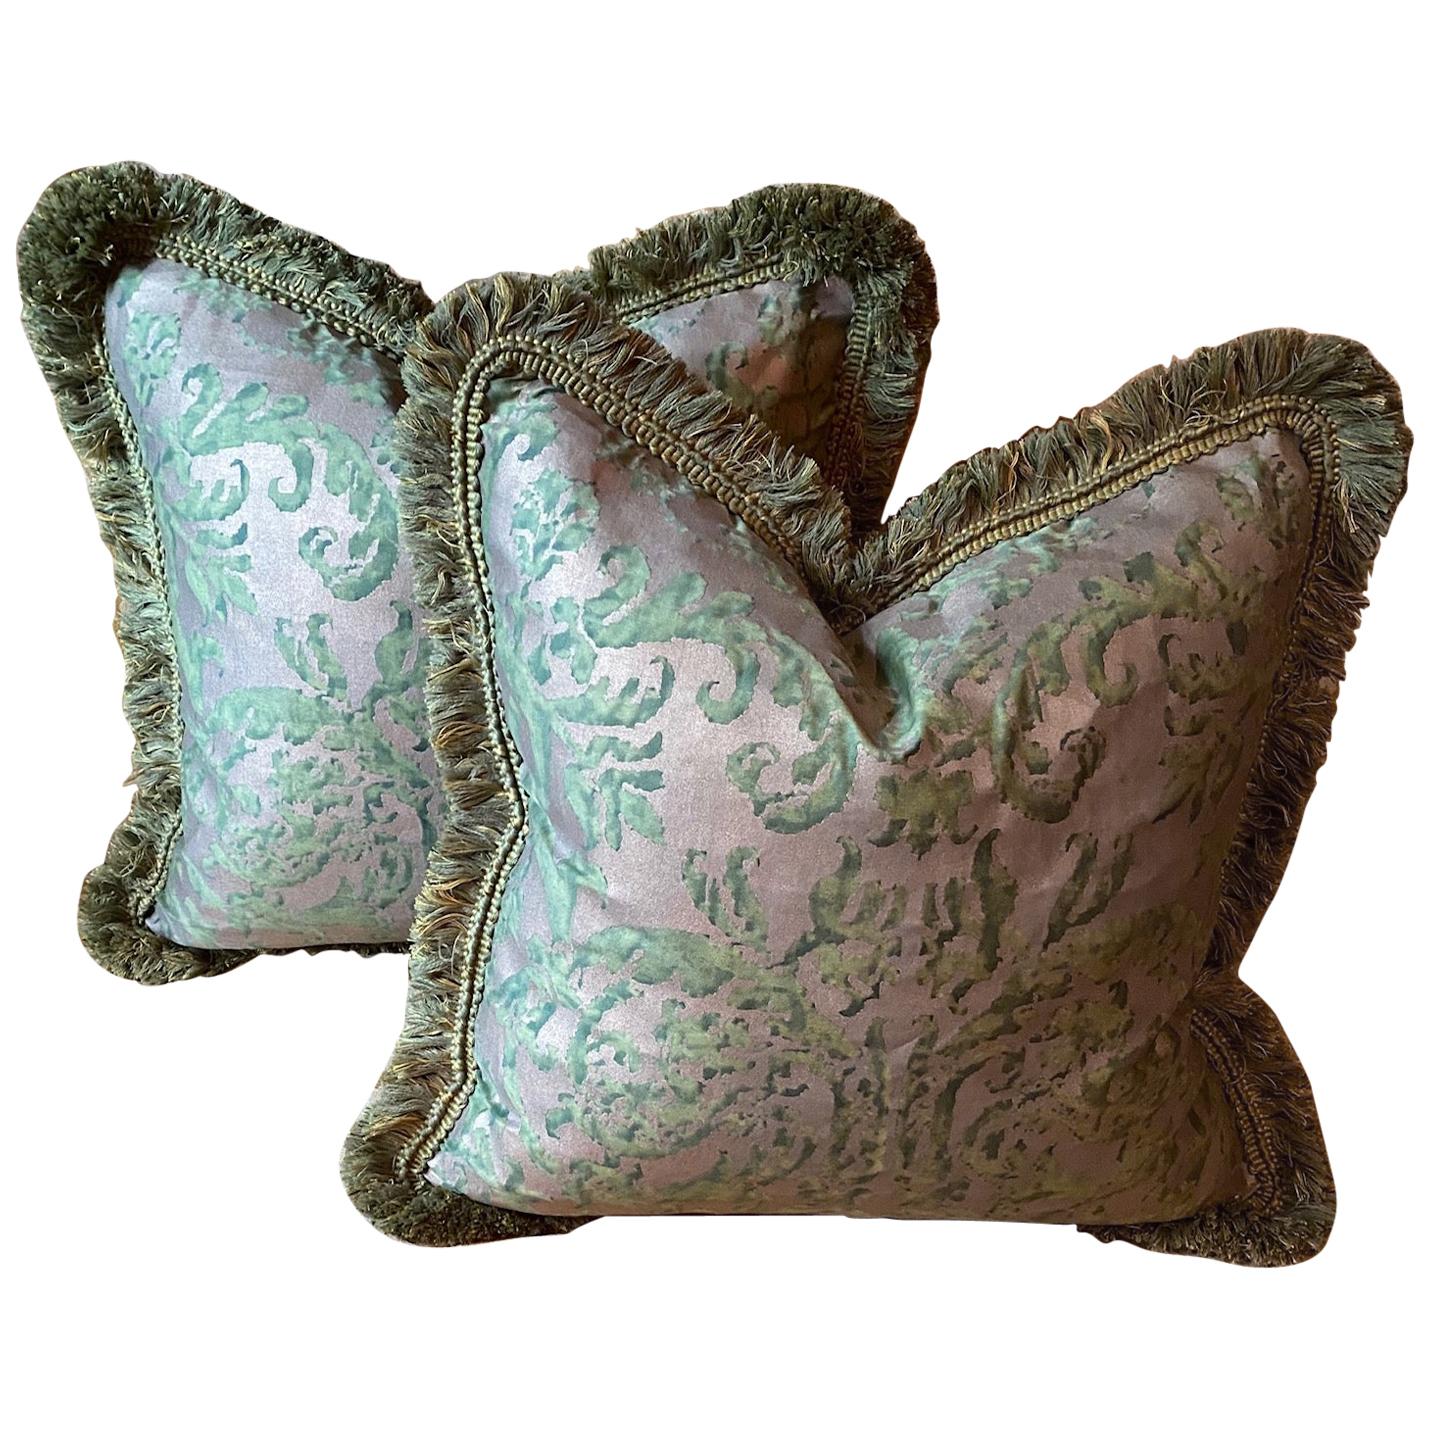 Large Pair of Green Fortuny Cushions, 'Farnese Pattern'